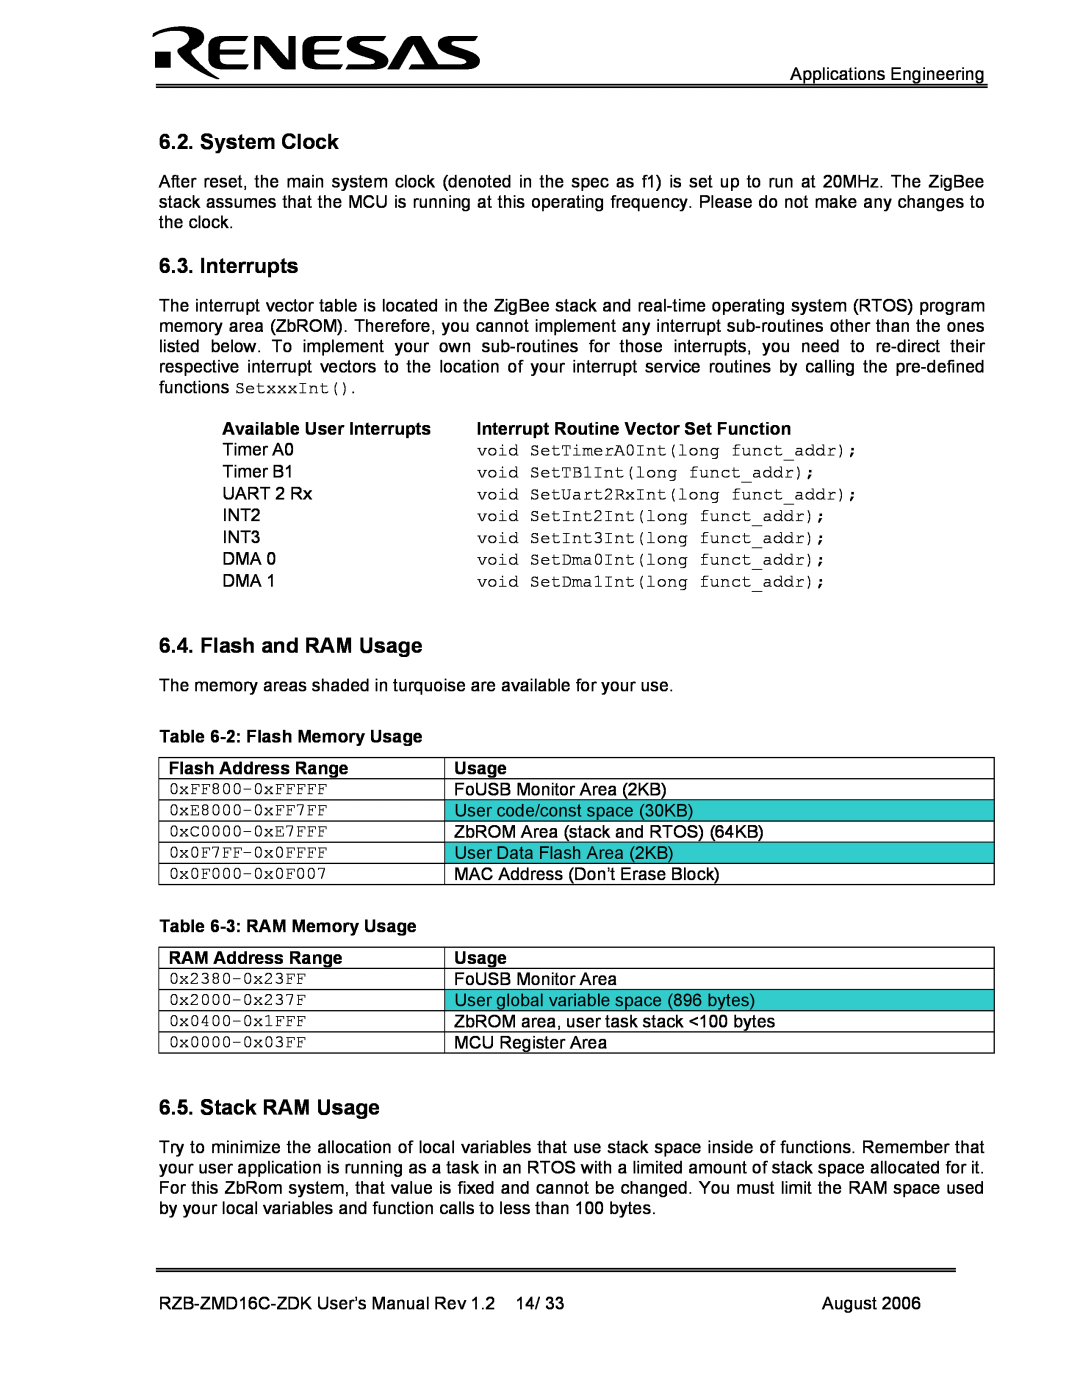 Renesas RZB-ZMD16C-ZDK user manual System Clock, Flash and RAM Usage, Stack RAM Usage, Available User Interrupts 